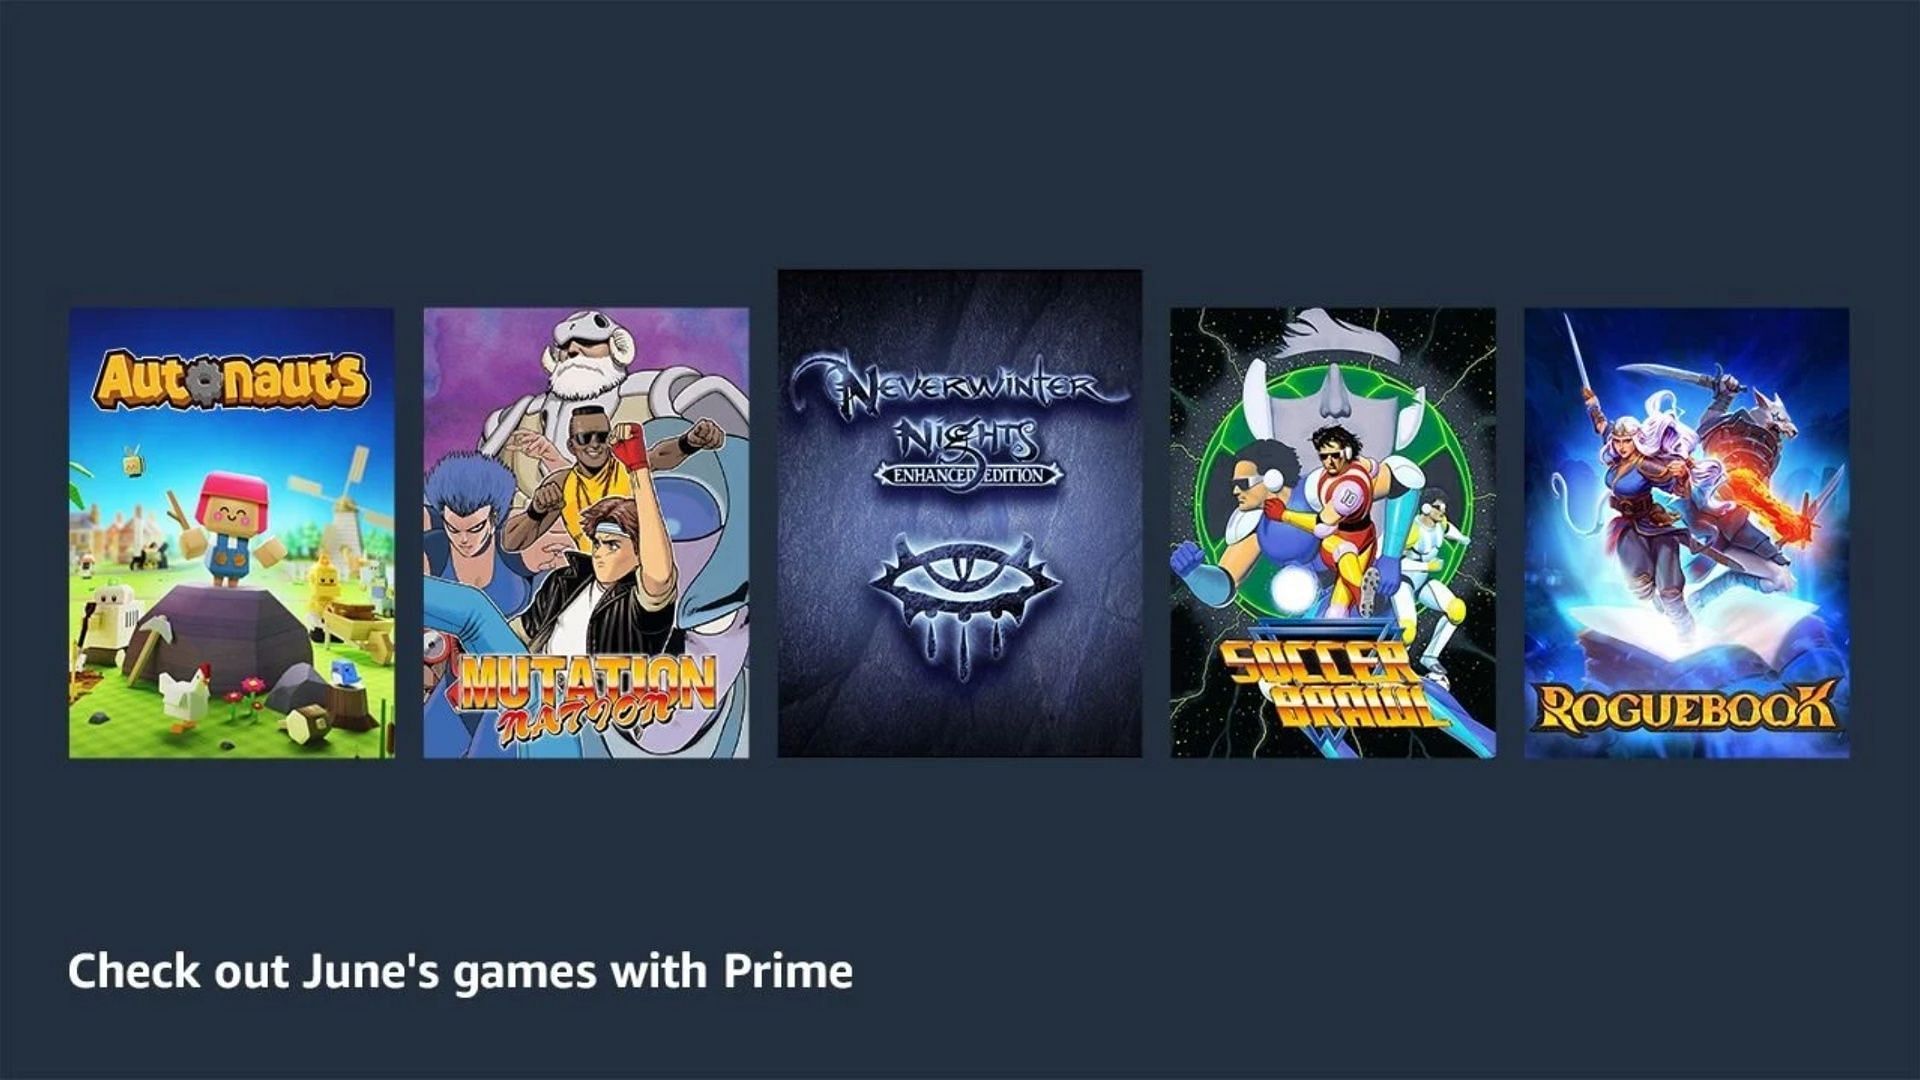 has added 8 more 'free' titles to Prime Gaming's May line-up